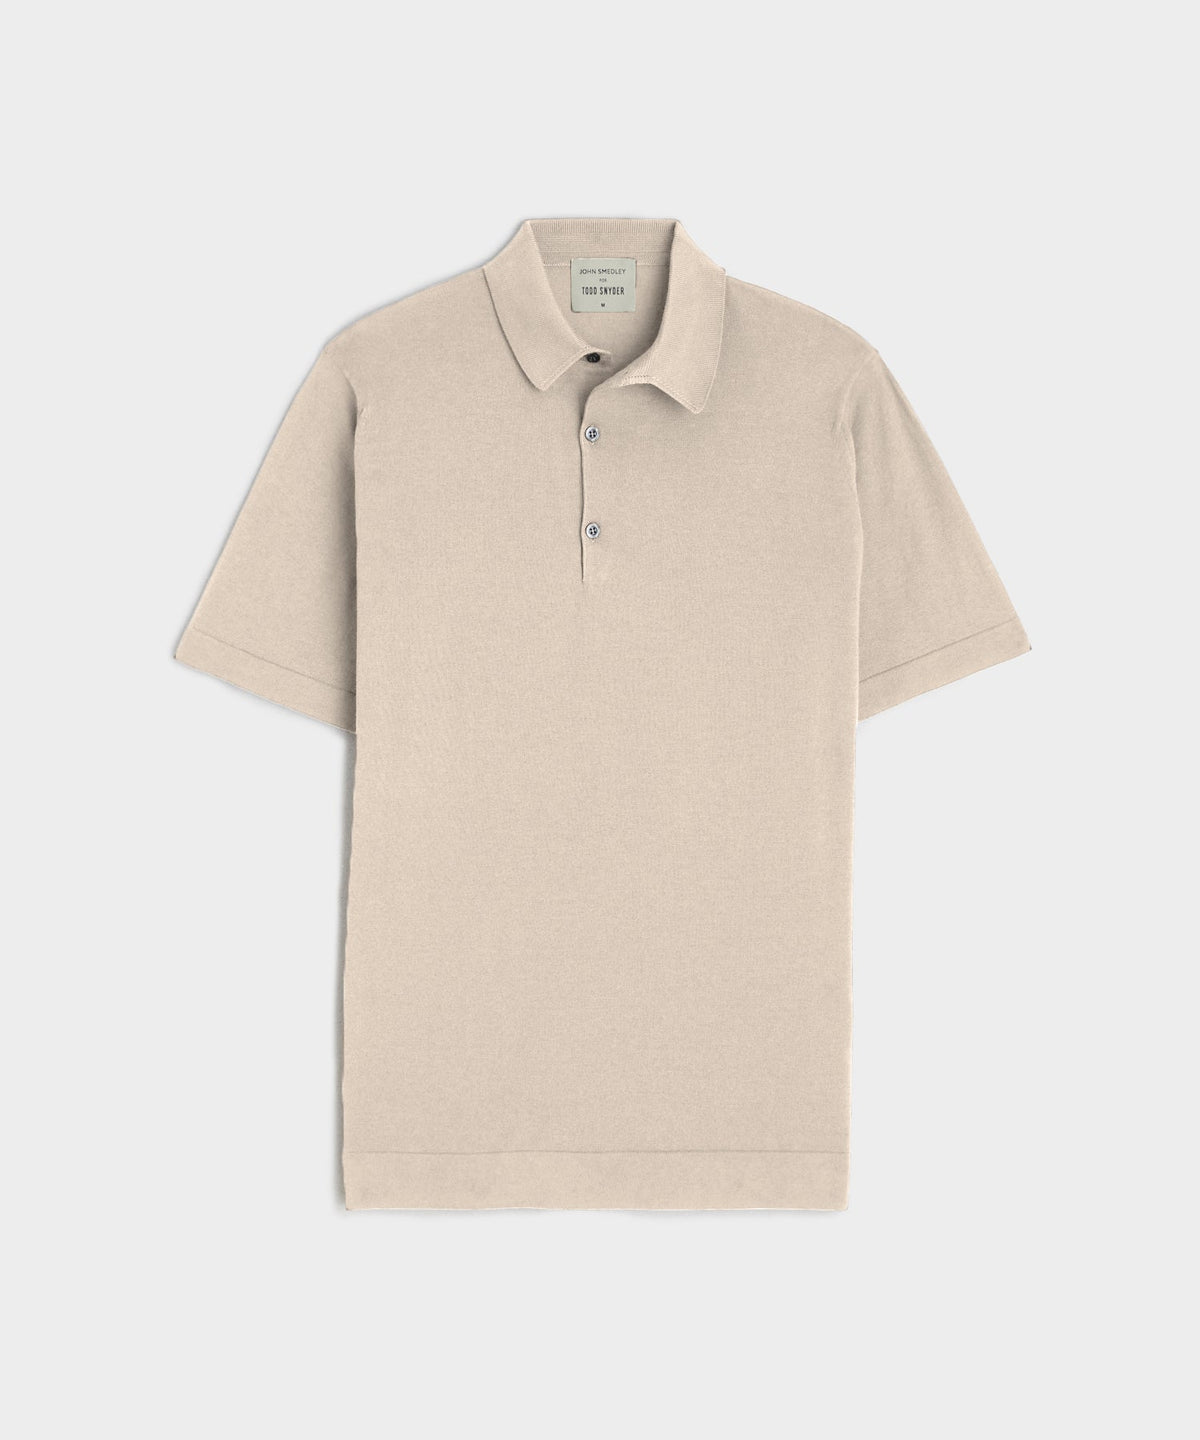 John Smedley x Todd Snyder Mycroft Polo in Toasted Almond